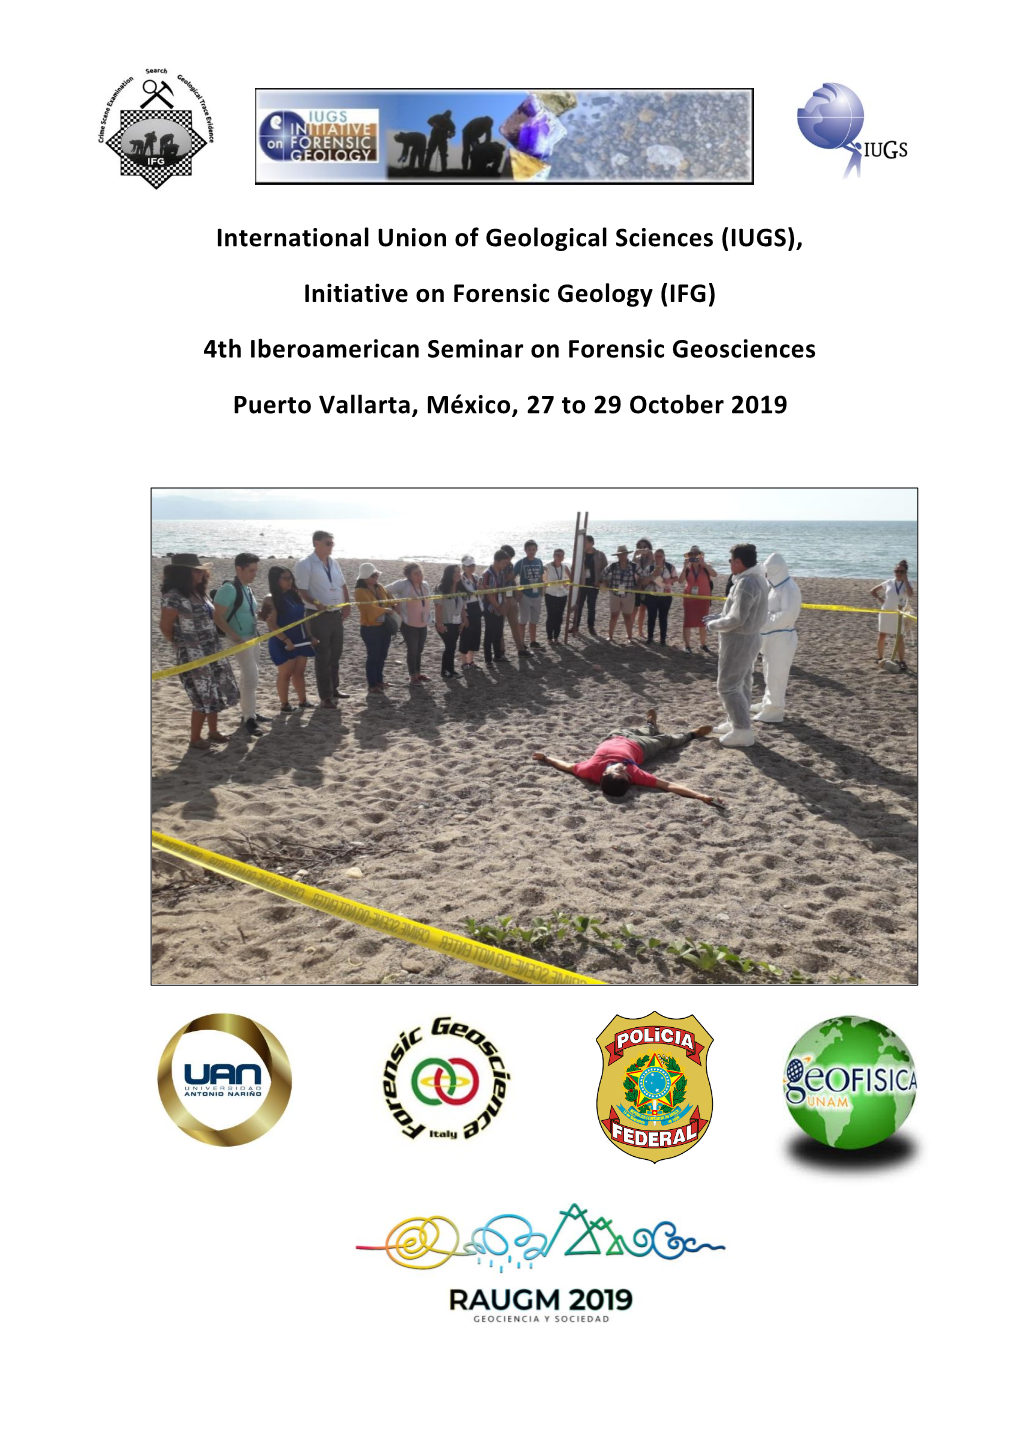 Initiative on Forensic Geology (IFG)